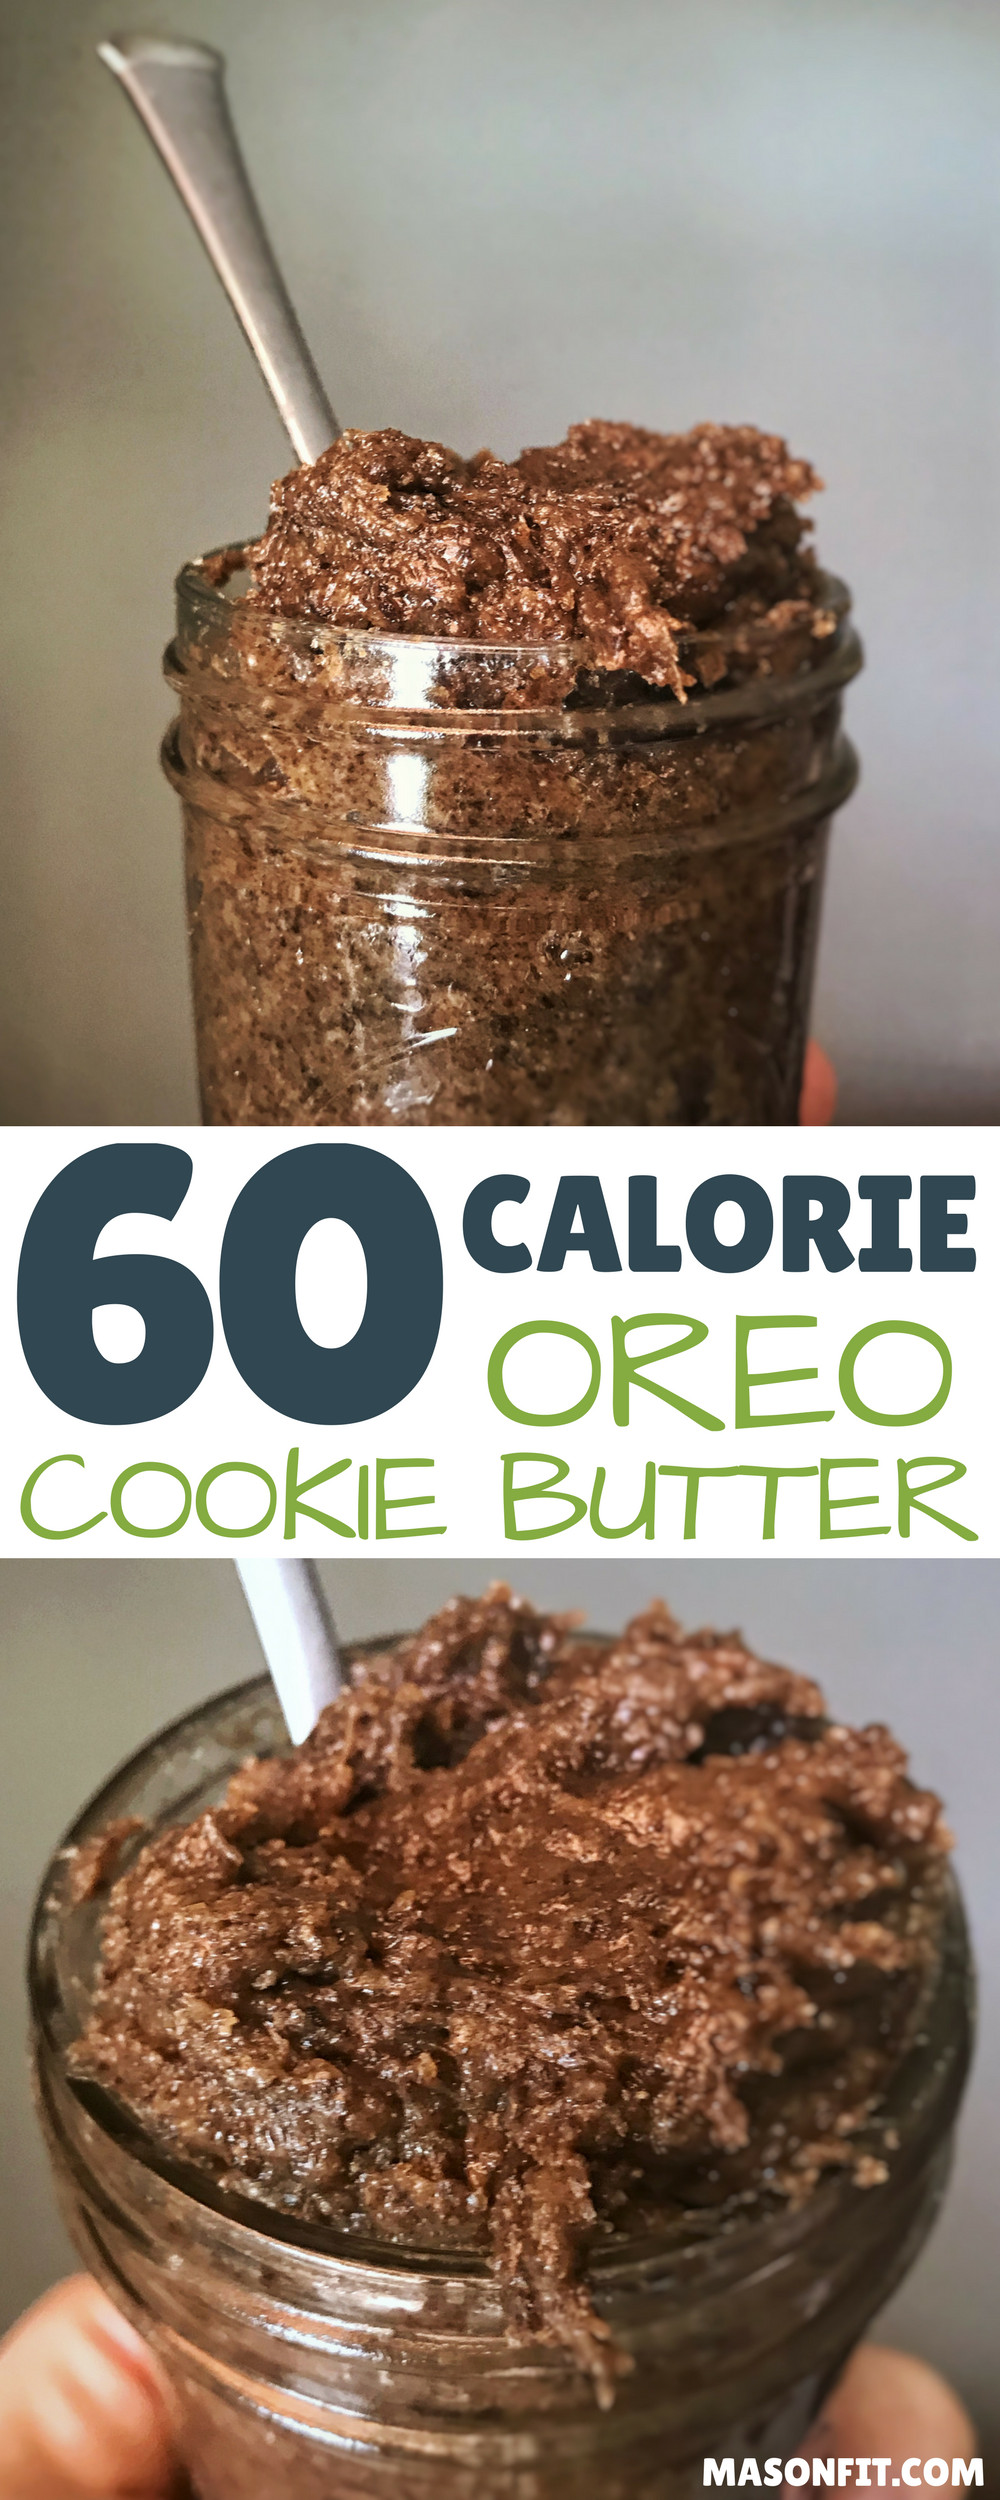 Low Calorie Biscuit Recipe
 An Oreo flavored healthy cookie butter recipe that has 